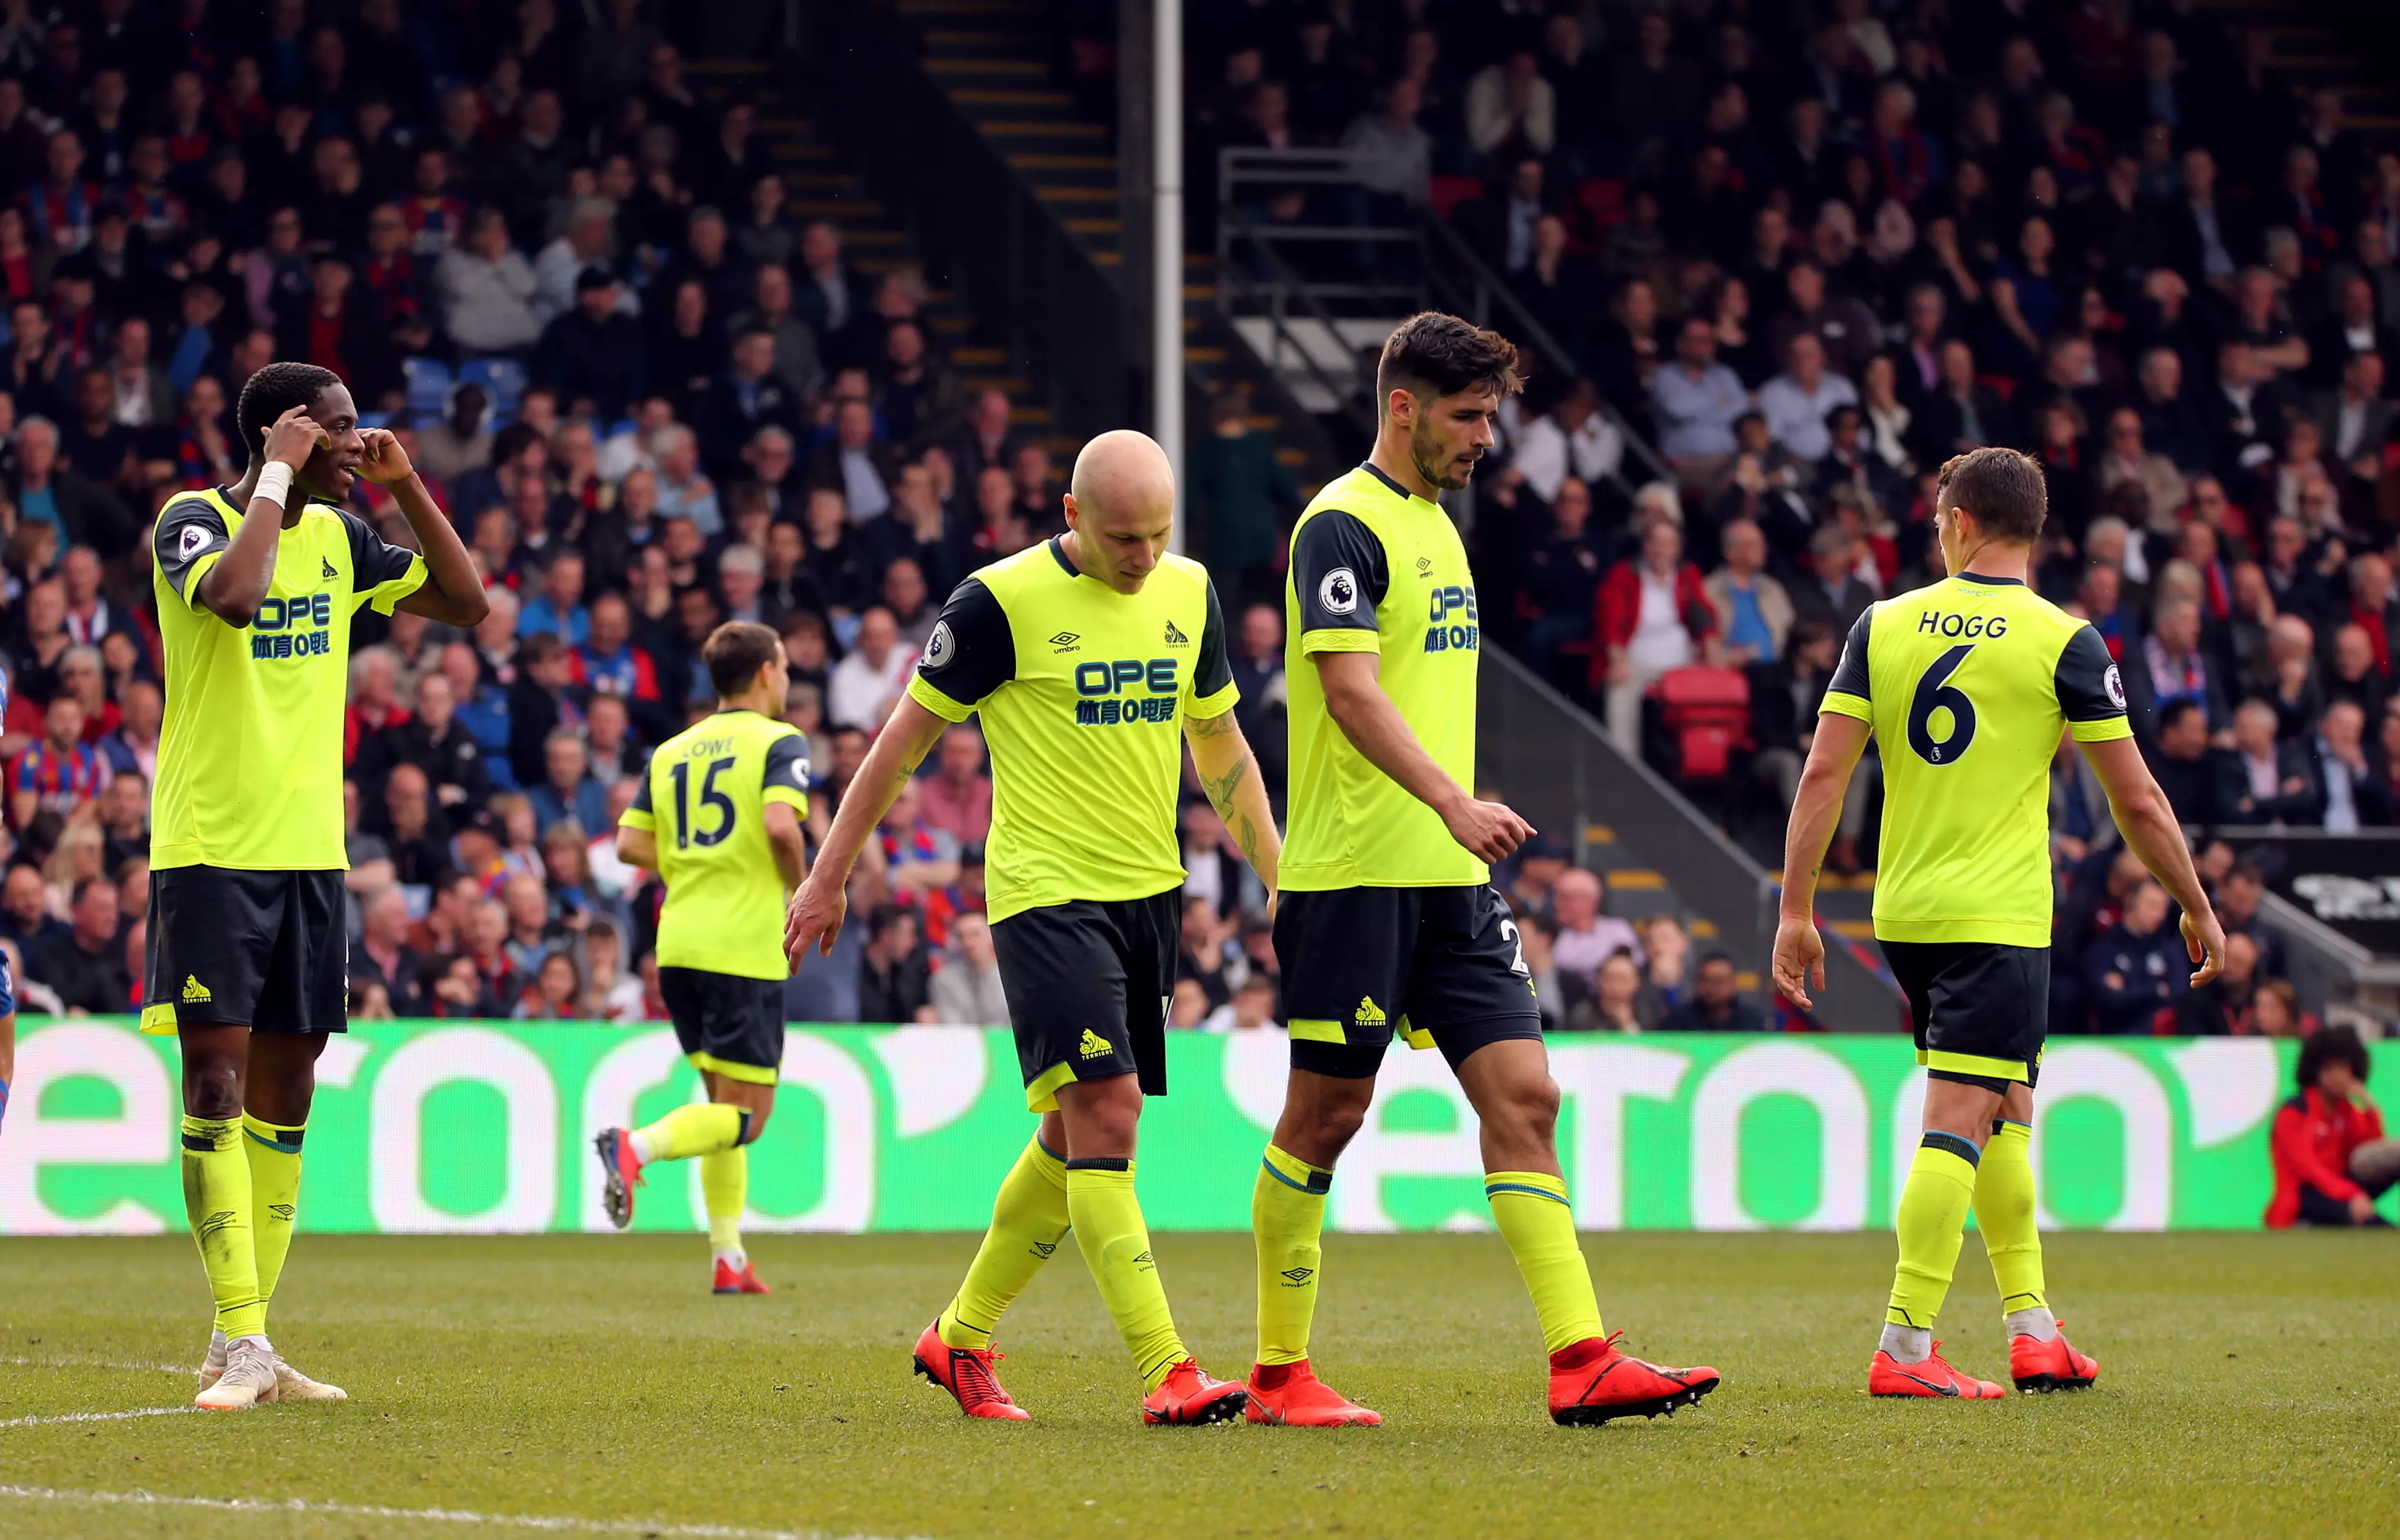 Huddersfield Town players after their loss to Crystal Palace saw them go down. Image: PA Images